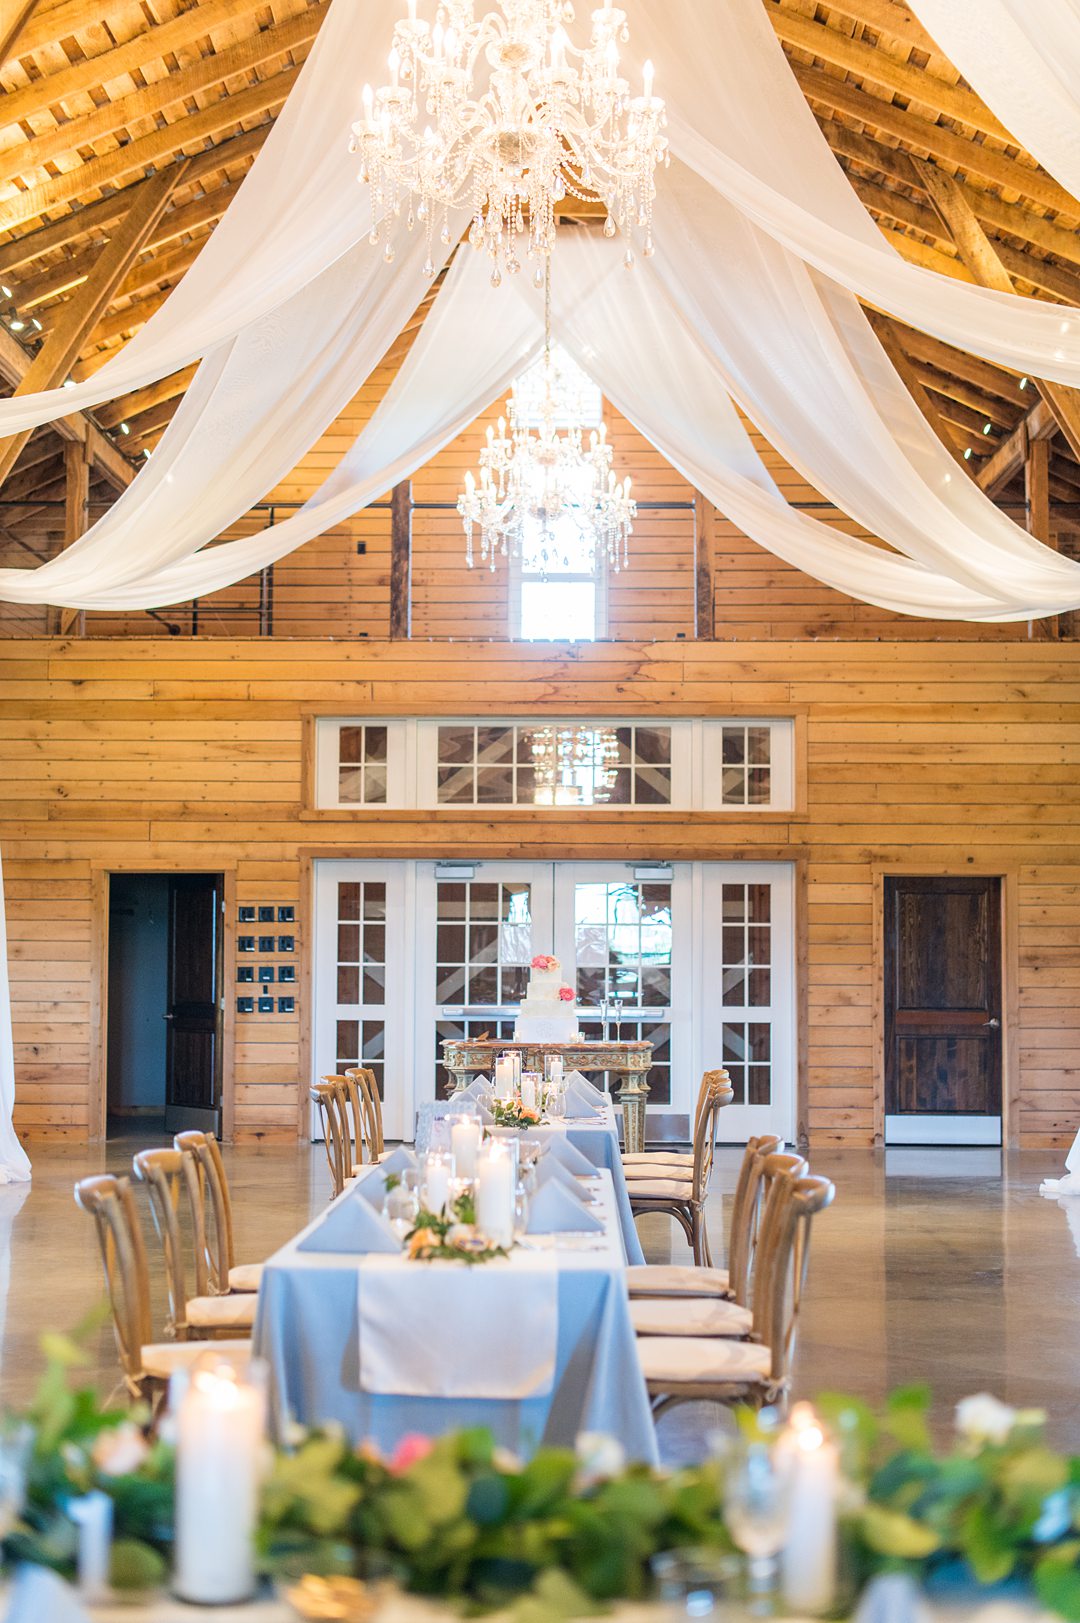 A socially distanced small wedding reception in Charlottesville, VA at the Lodge at Mount Ida farm. Photos by Mikkel Paige Photography. #mikkelpaige #covidwedding #charlottesvilleva